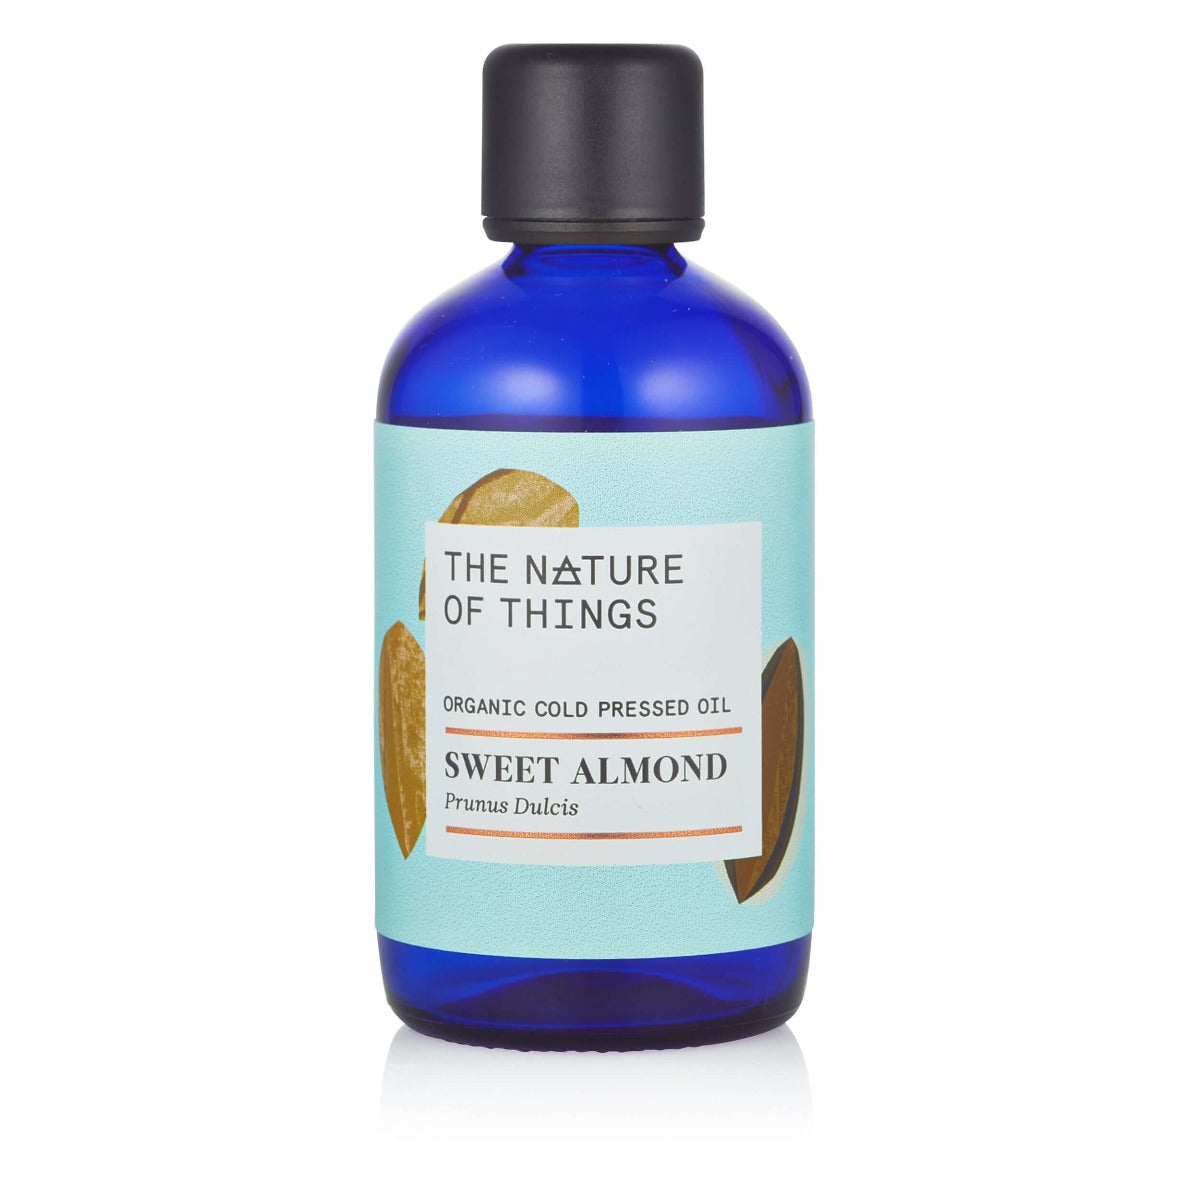 Organic Almond Oil from The Nature of Things